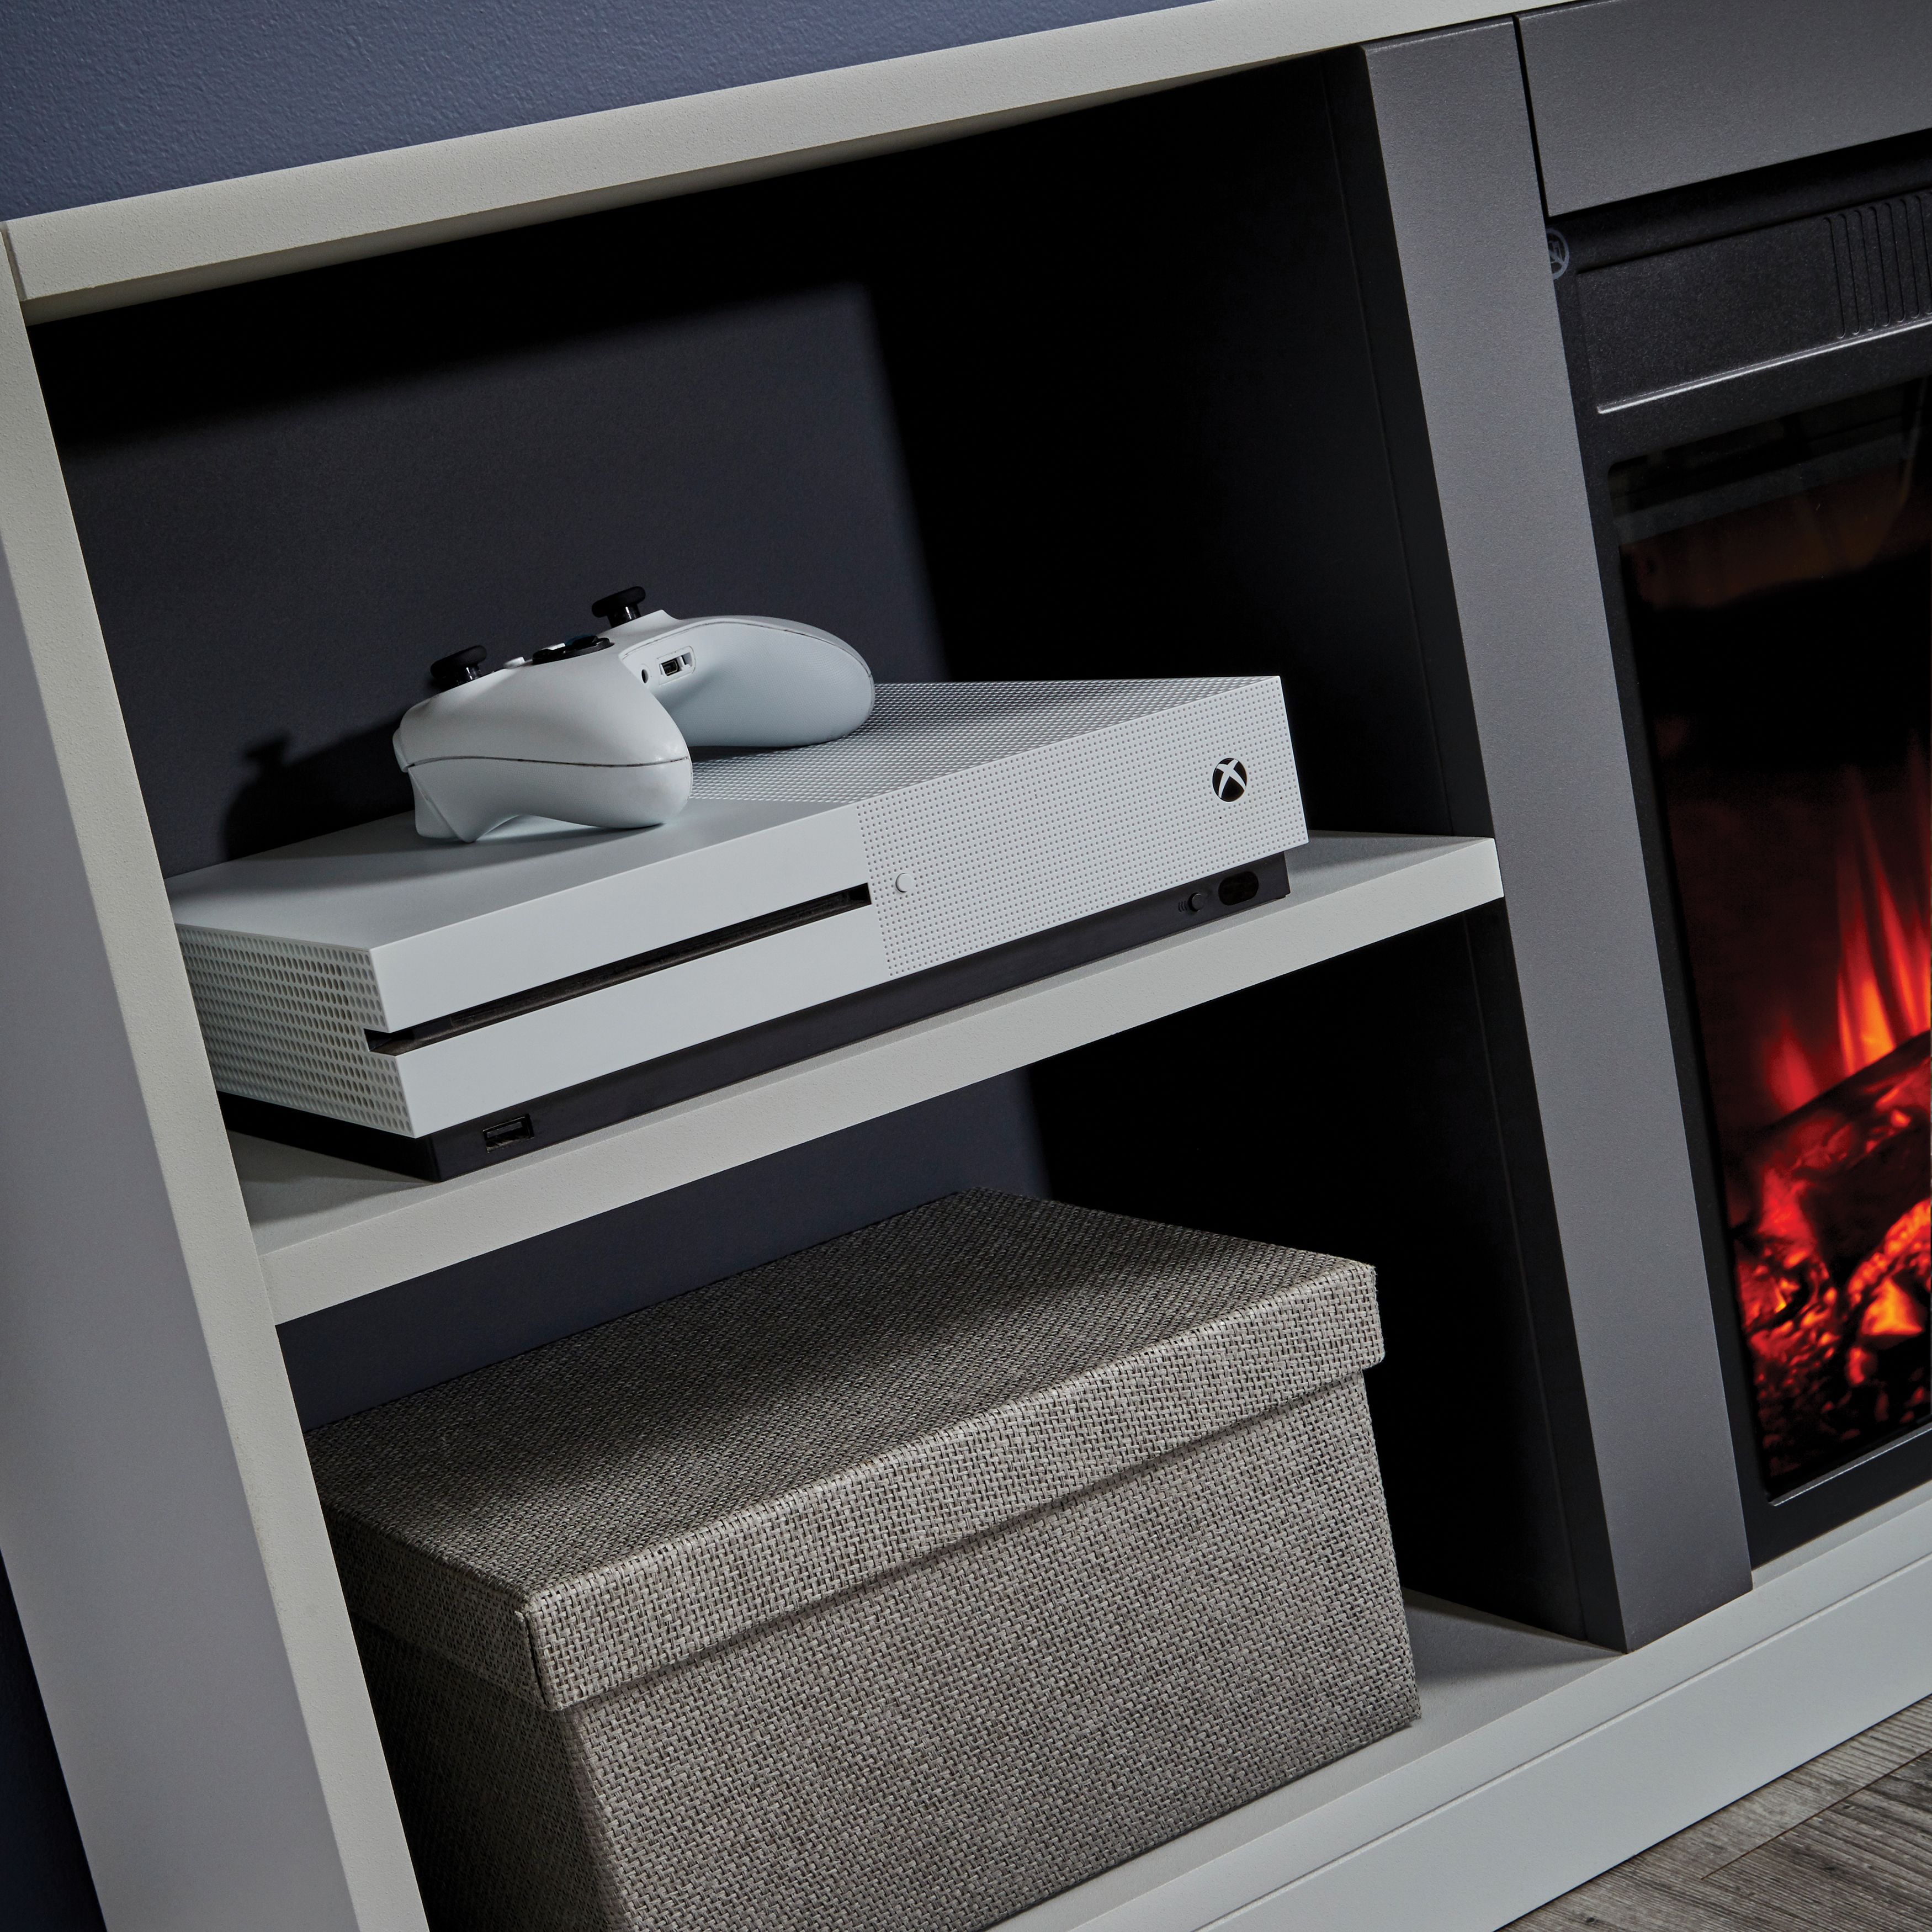 Suncrest Camden Grey Stone effect MDF & stainless steel Freestanding Electric fire suite